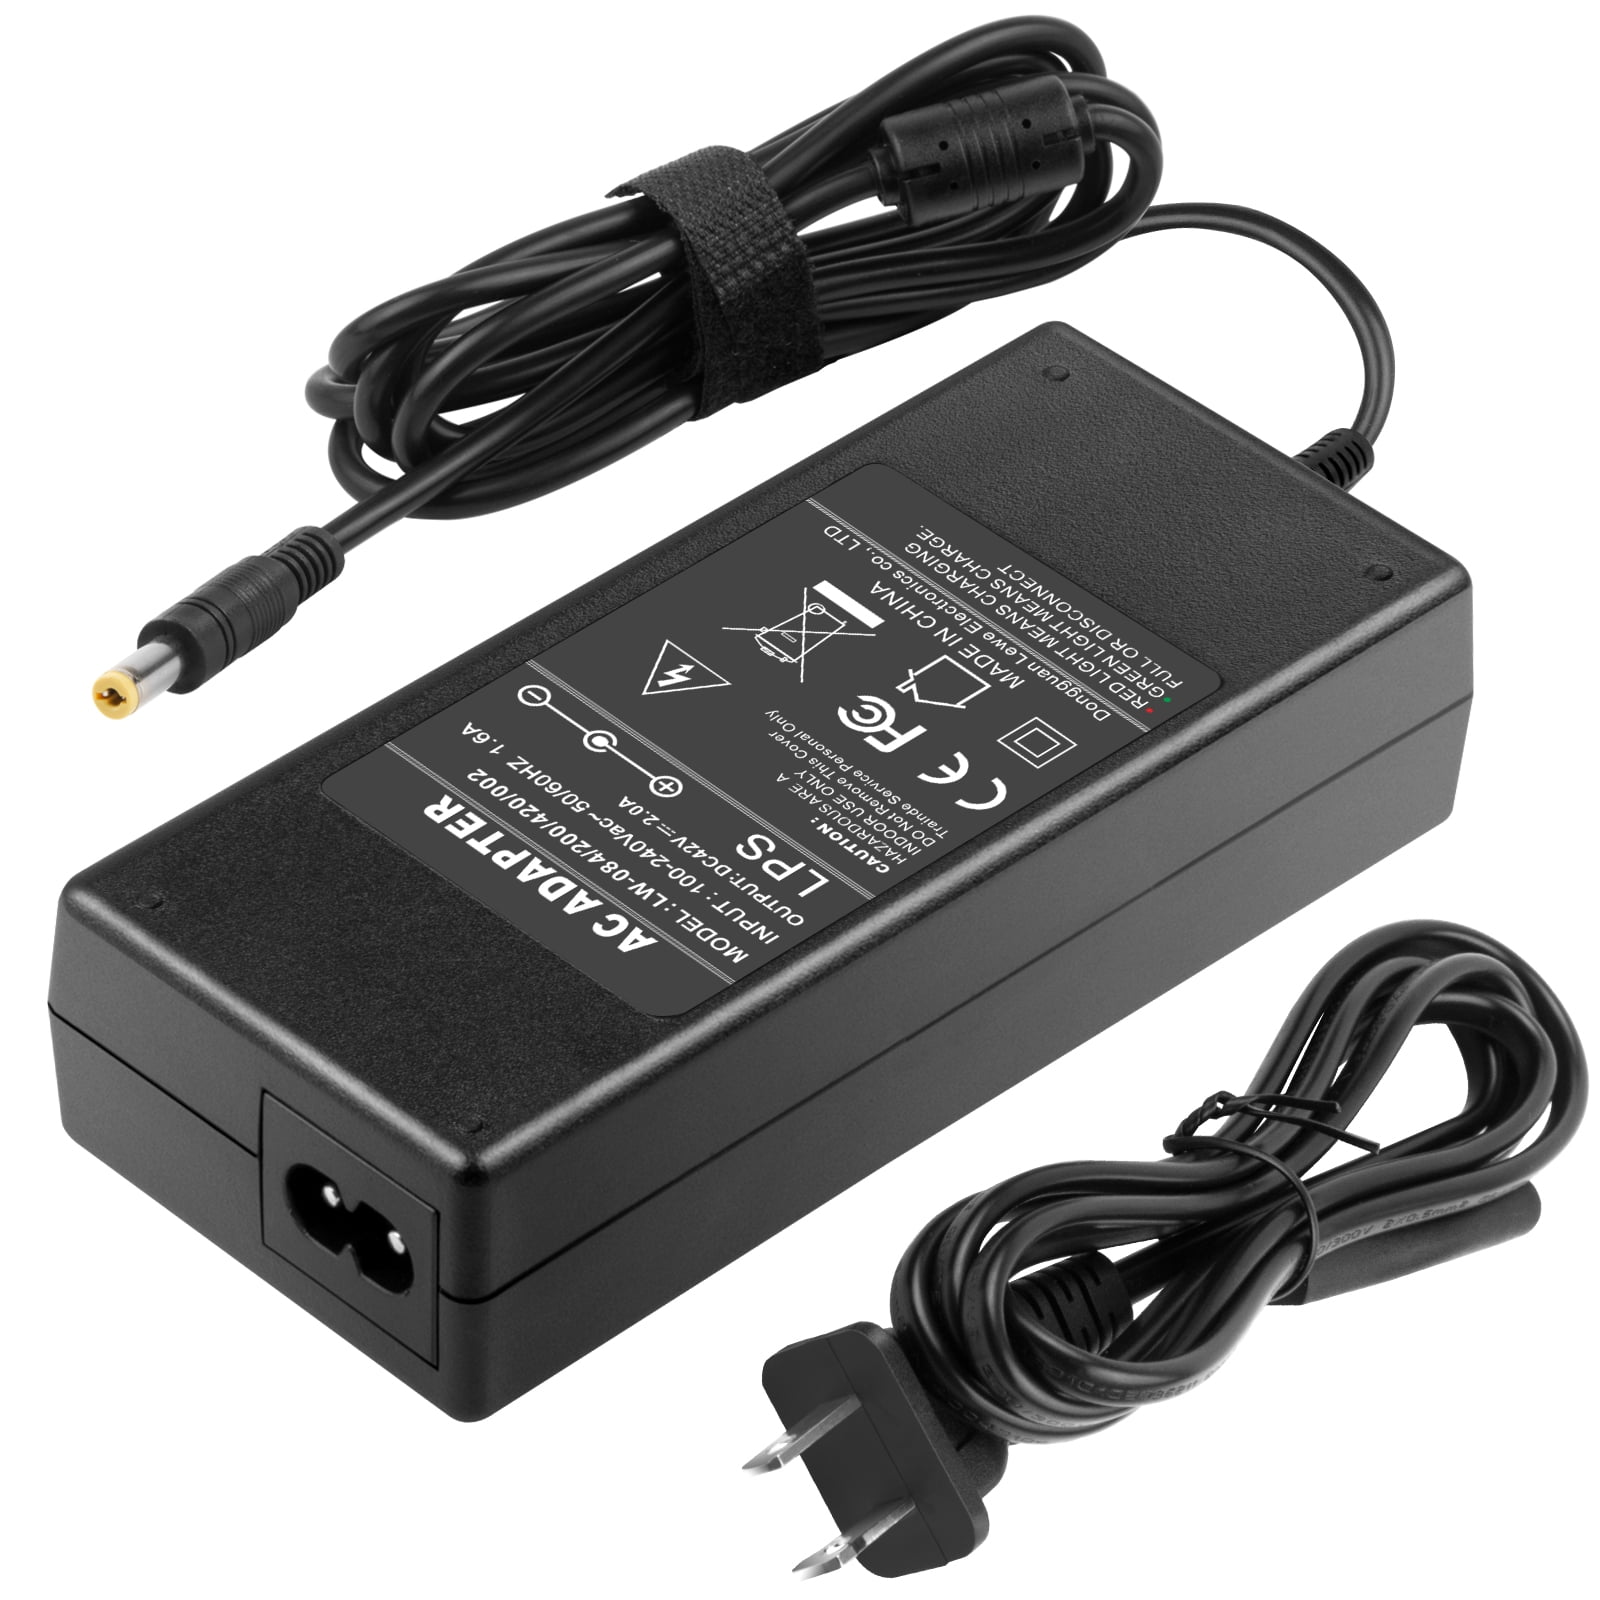 42V 2A Charger Scooter Power Adapter Charger DC Port for Scooter Battery  Pack Electric Longboard Skateboard Output